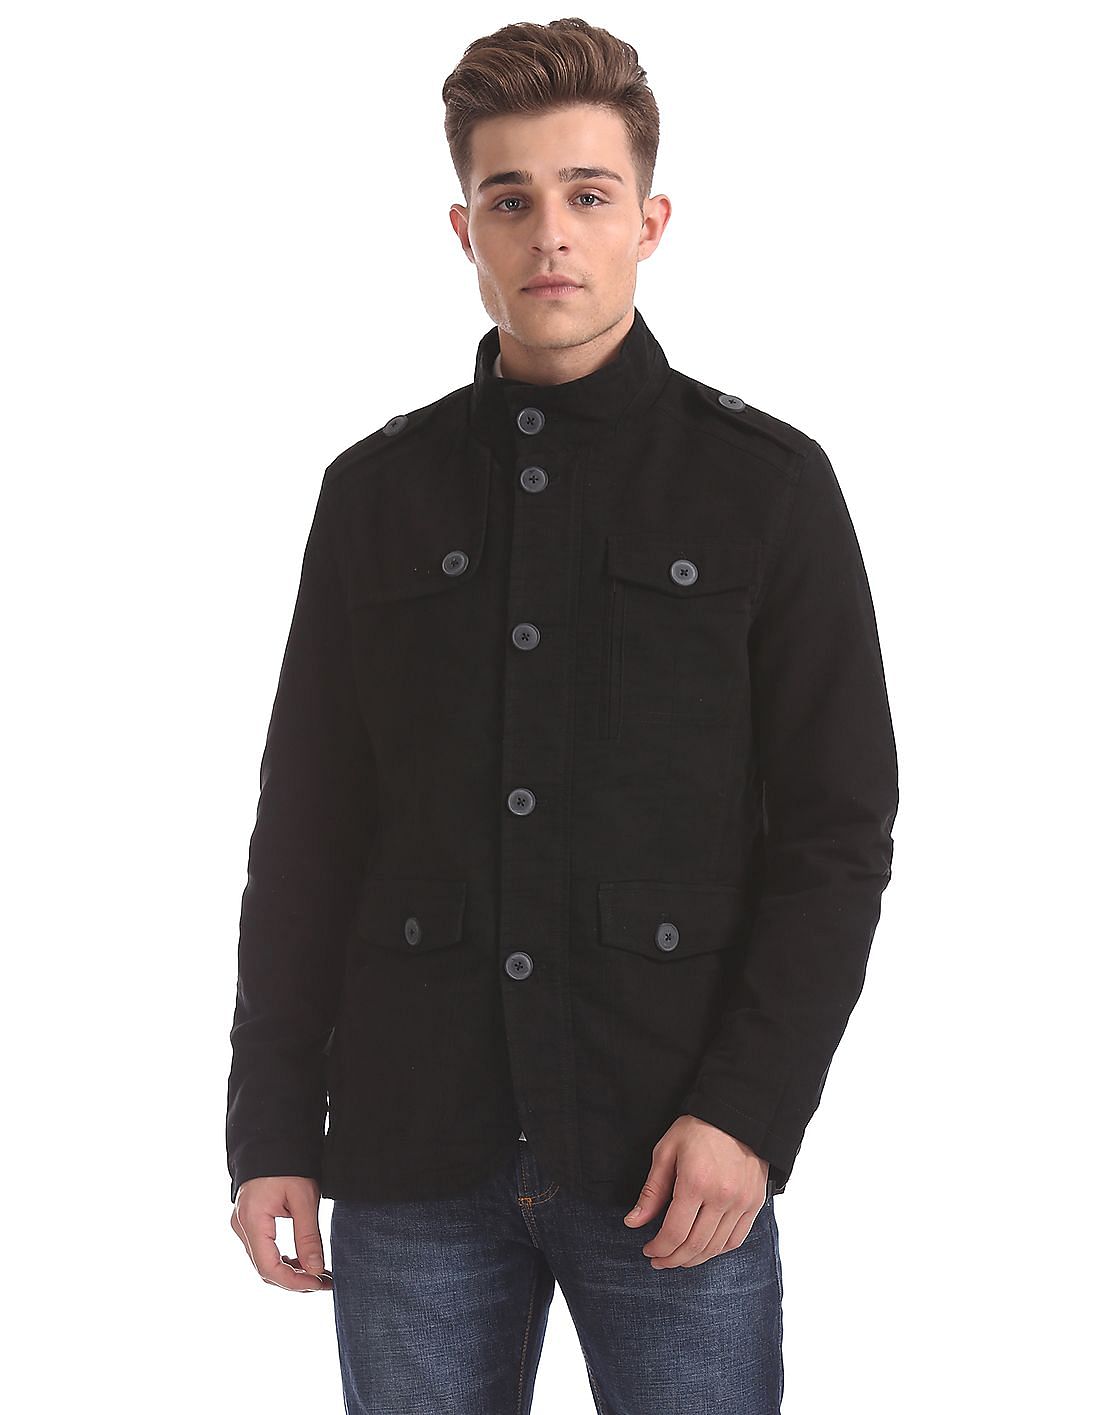 Buy Men Solid Twill Jacket online at NNNOW.com